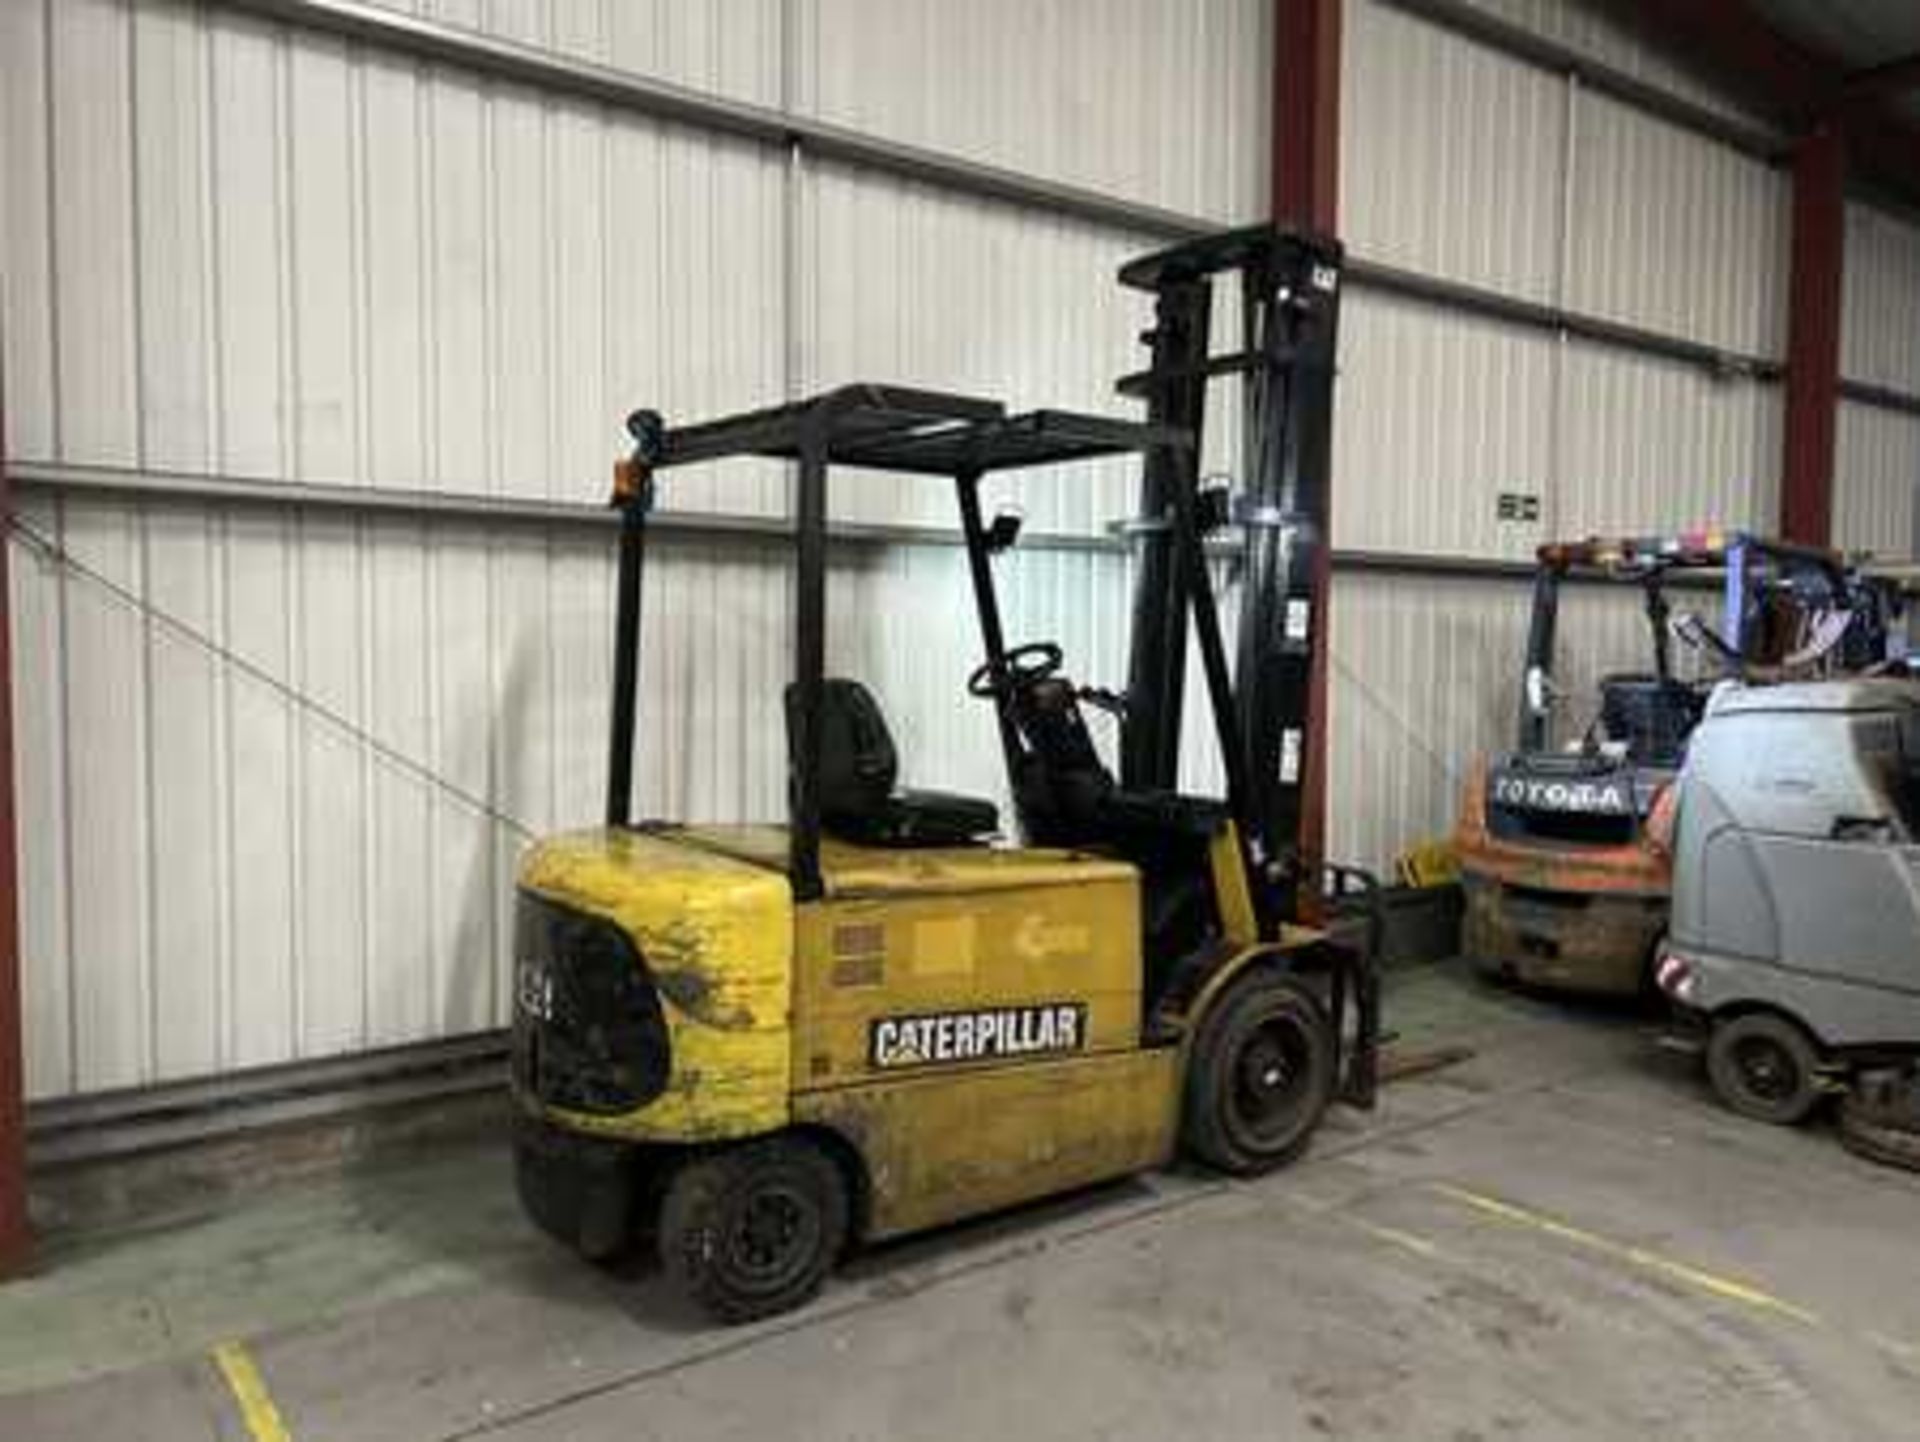 CAT ELECTRIC FORKLIFT - EP35K-PAC, 2014 - Image 6 of 6